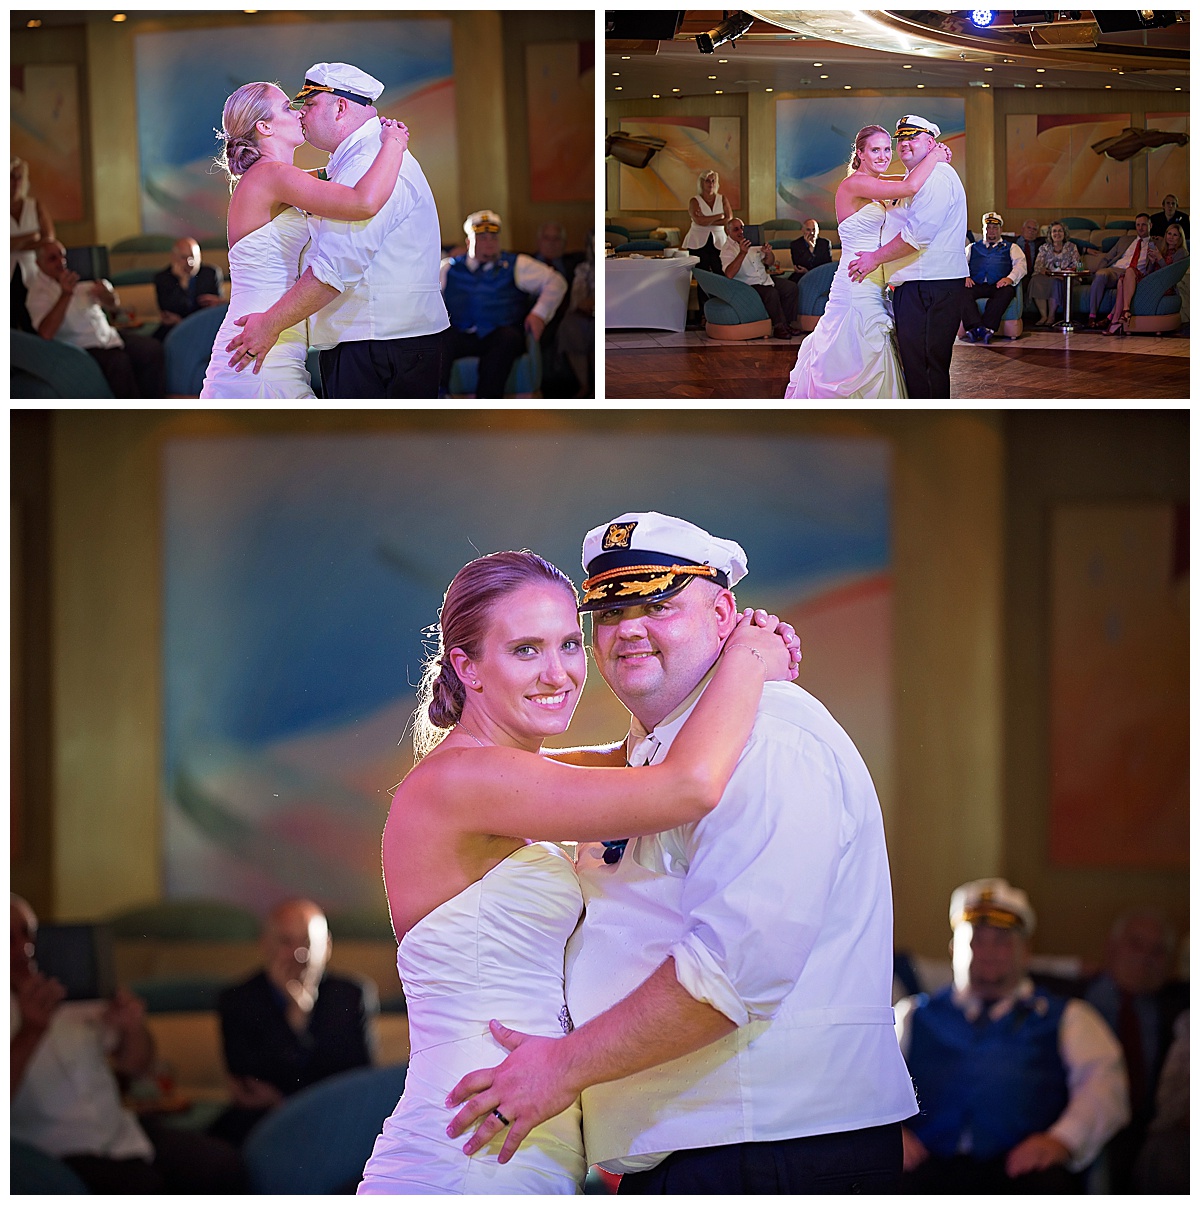 bride and groom dancing at reception, , Destination wedding photography by Bokeh Love Photography